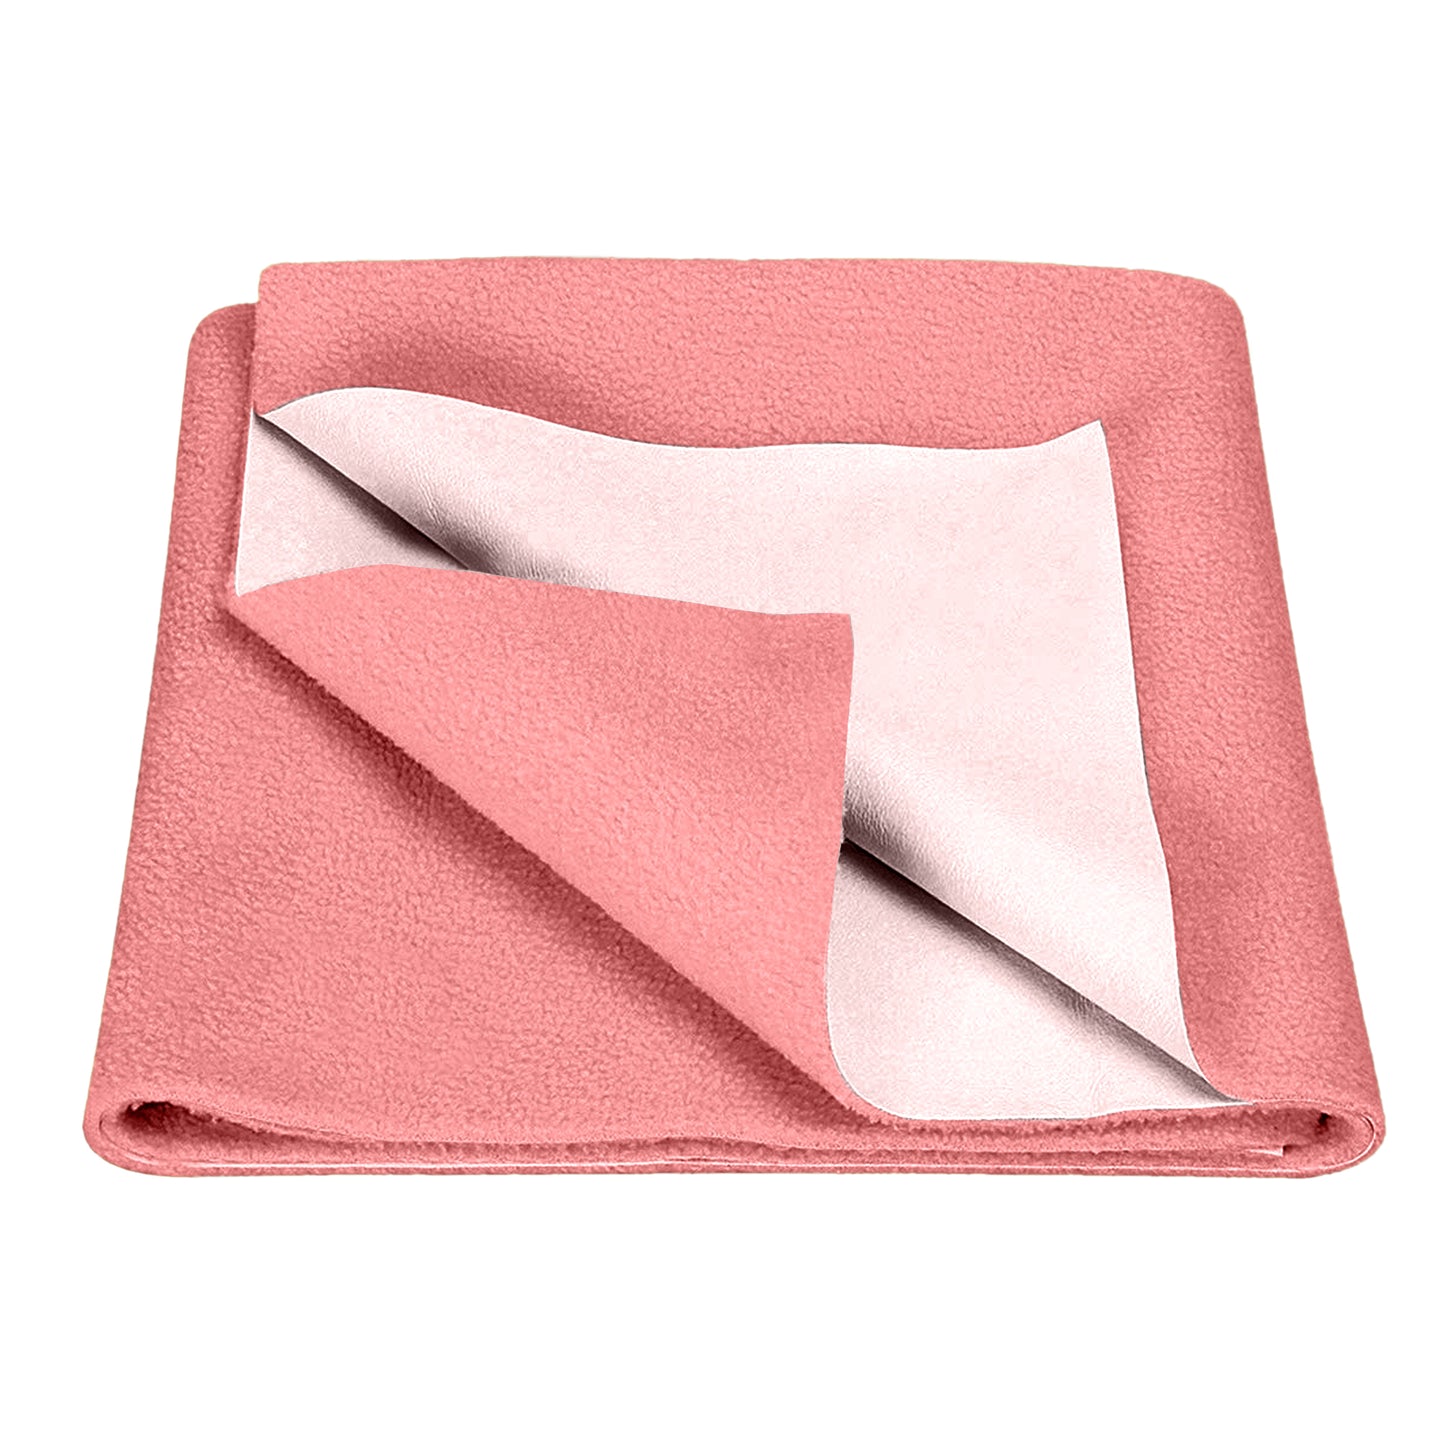 Waterproof Bed Protector, Extra Absorbent Quick Dry Sheet, Baby Bed Protector (70 X 50 CM), Pack of 2 -SELMON ROSE